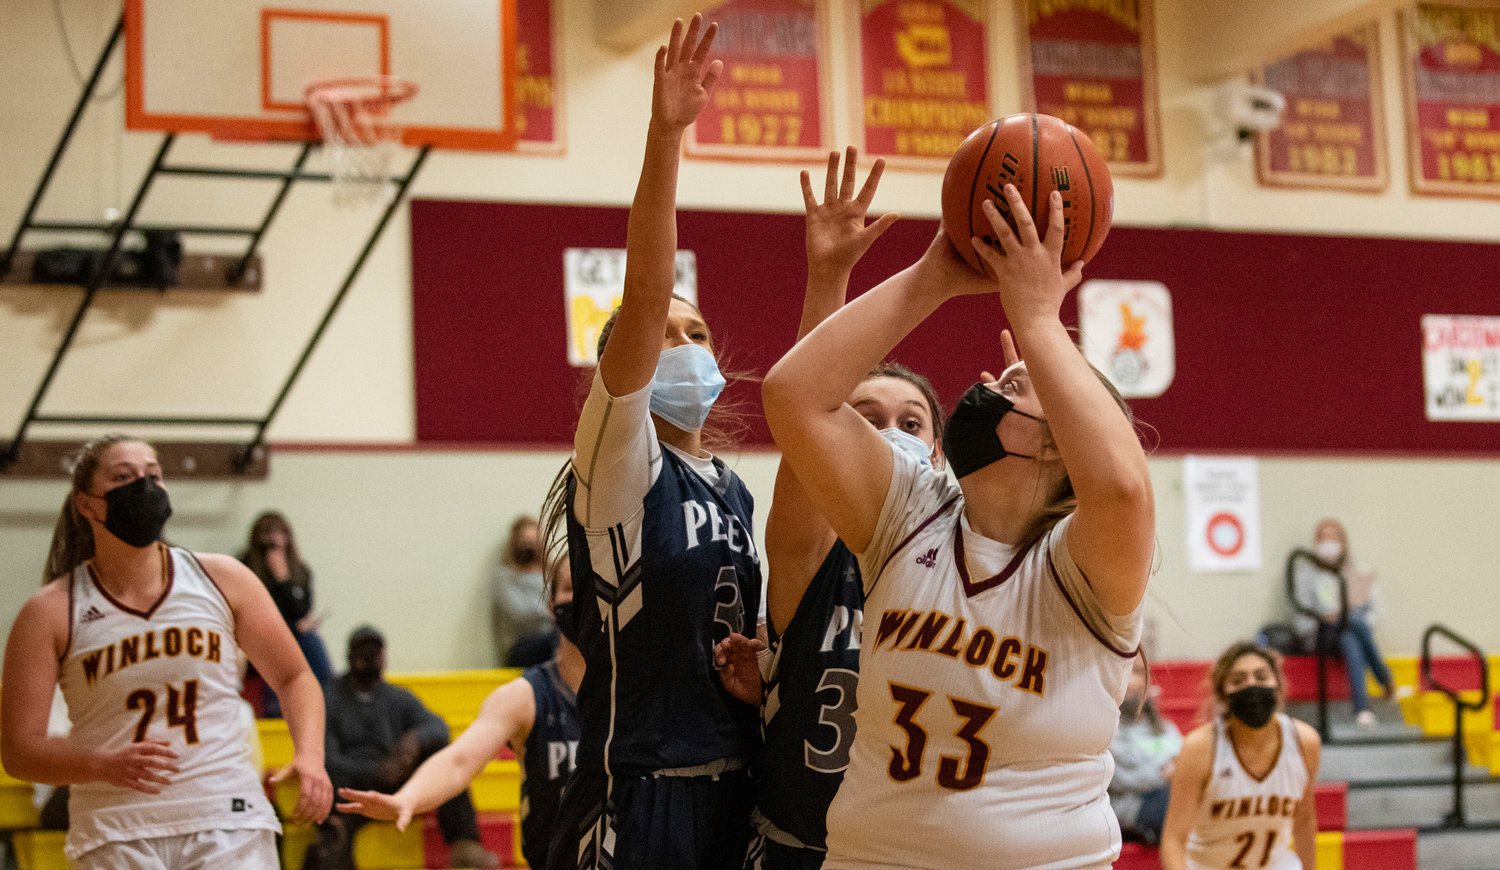 Winlock's Rylei Krusmark looks for a shot down low against Pe Ell on Saturday.